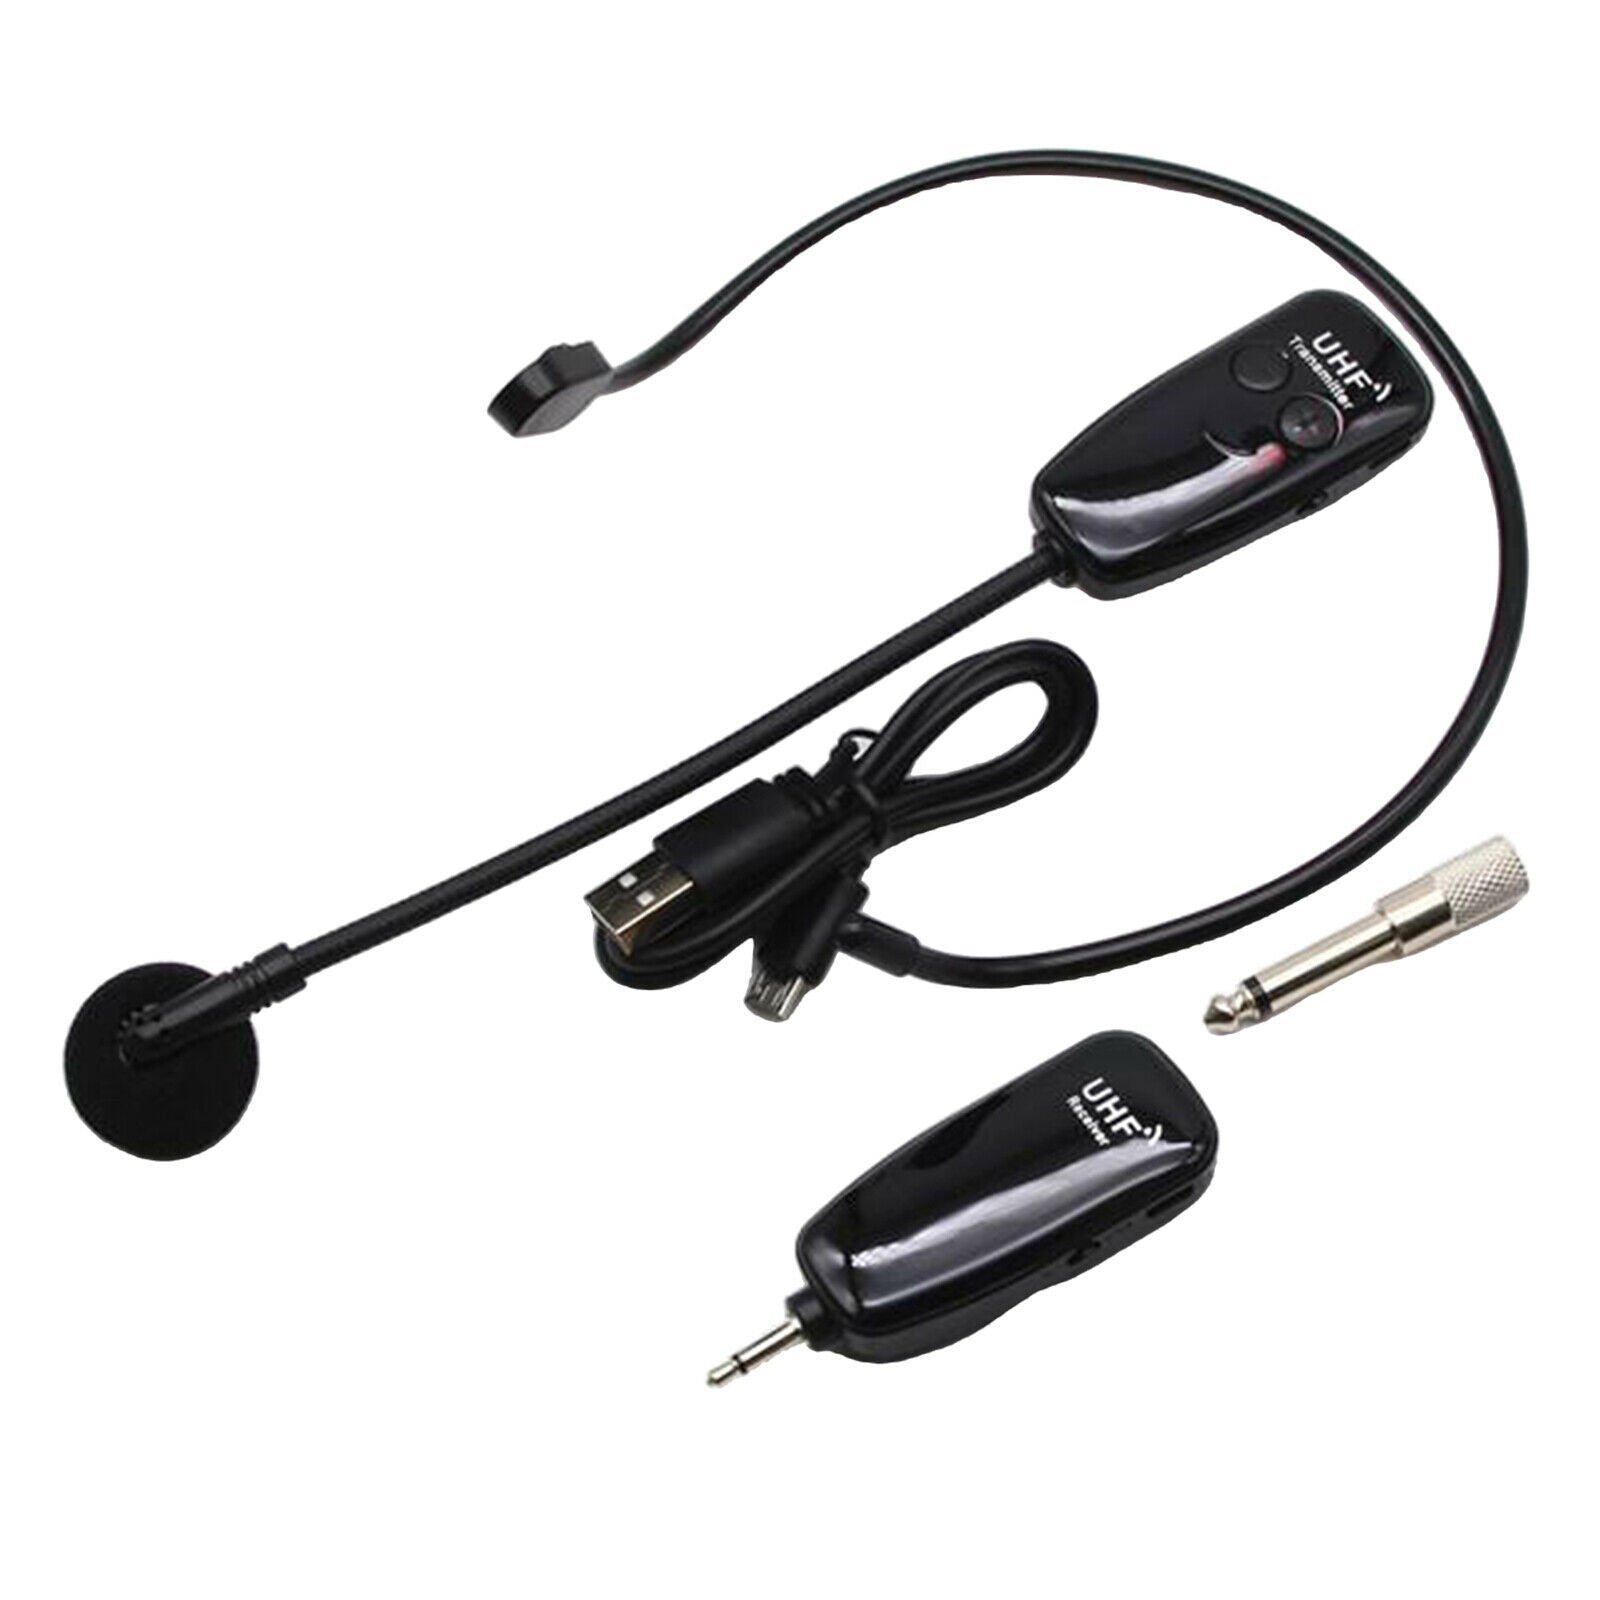 Wireless microphone & amp; Transmitter Headset Mic for Stage Speakers Public